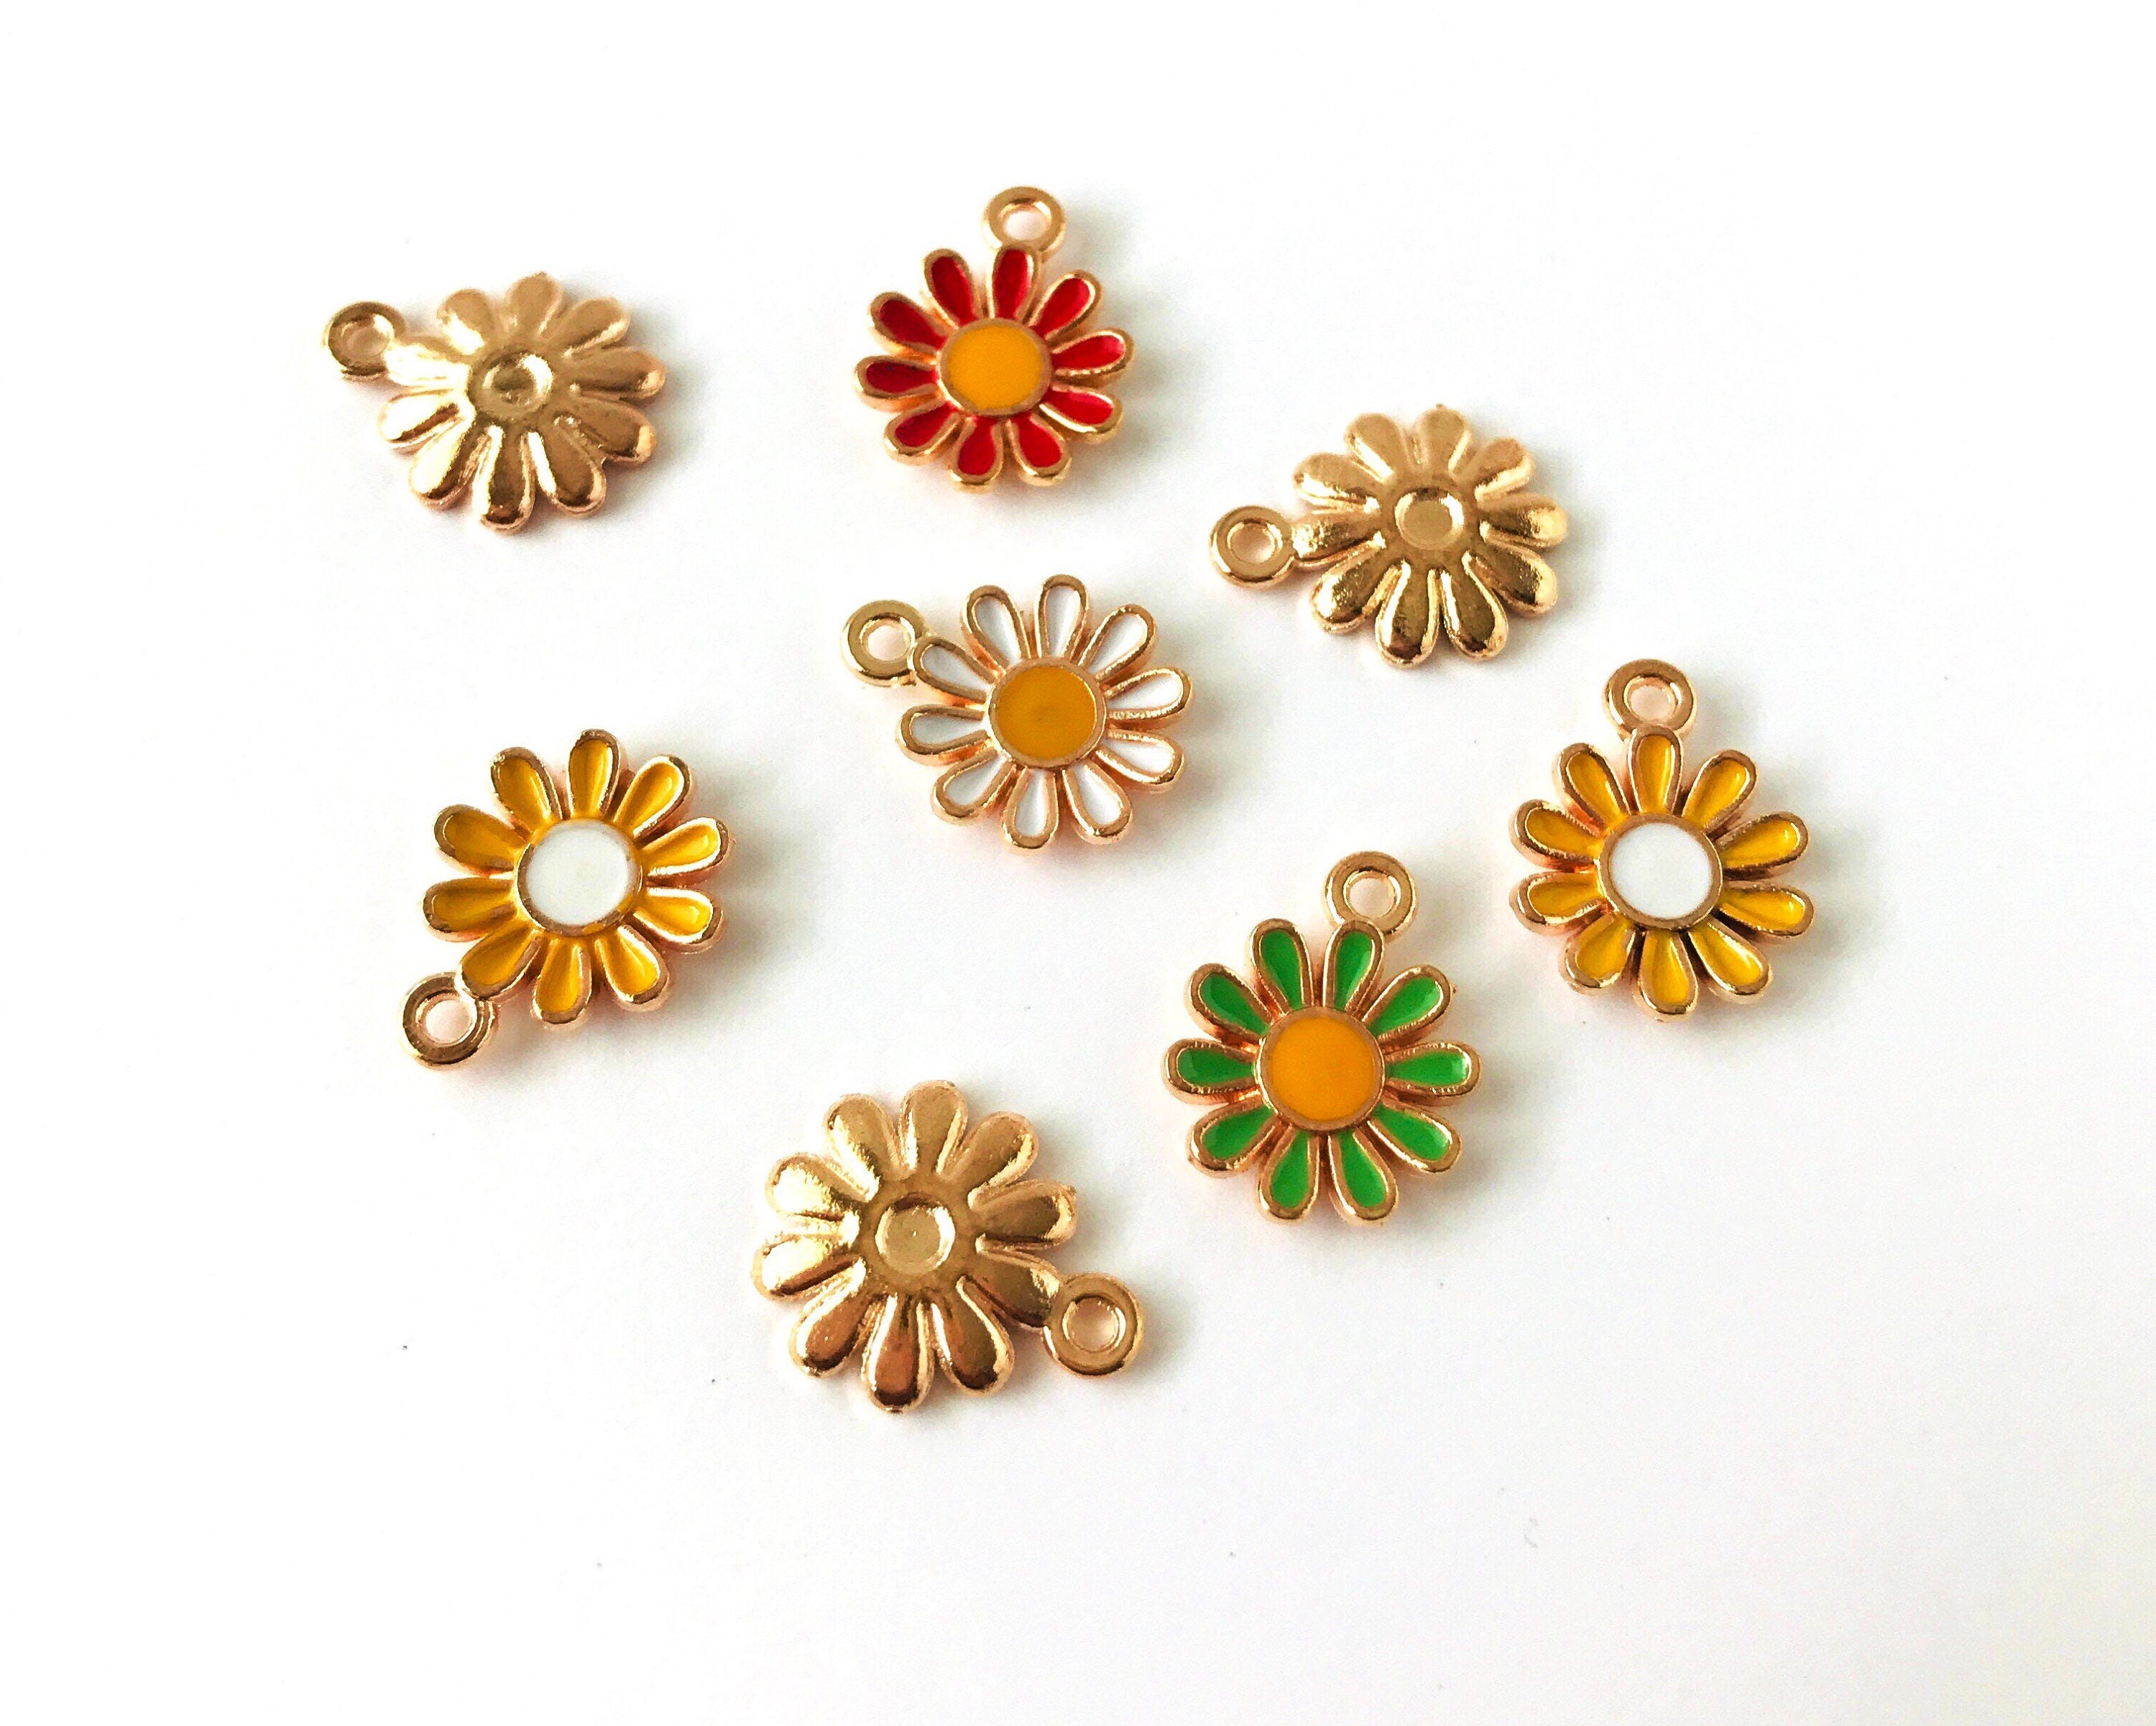 10 Flower Charms, Blue, Daisy, Summer, DIY, Floral, Jewelry Making